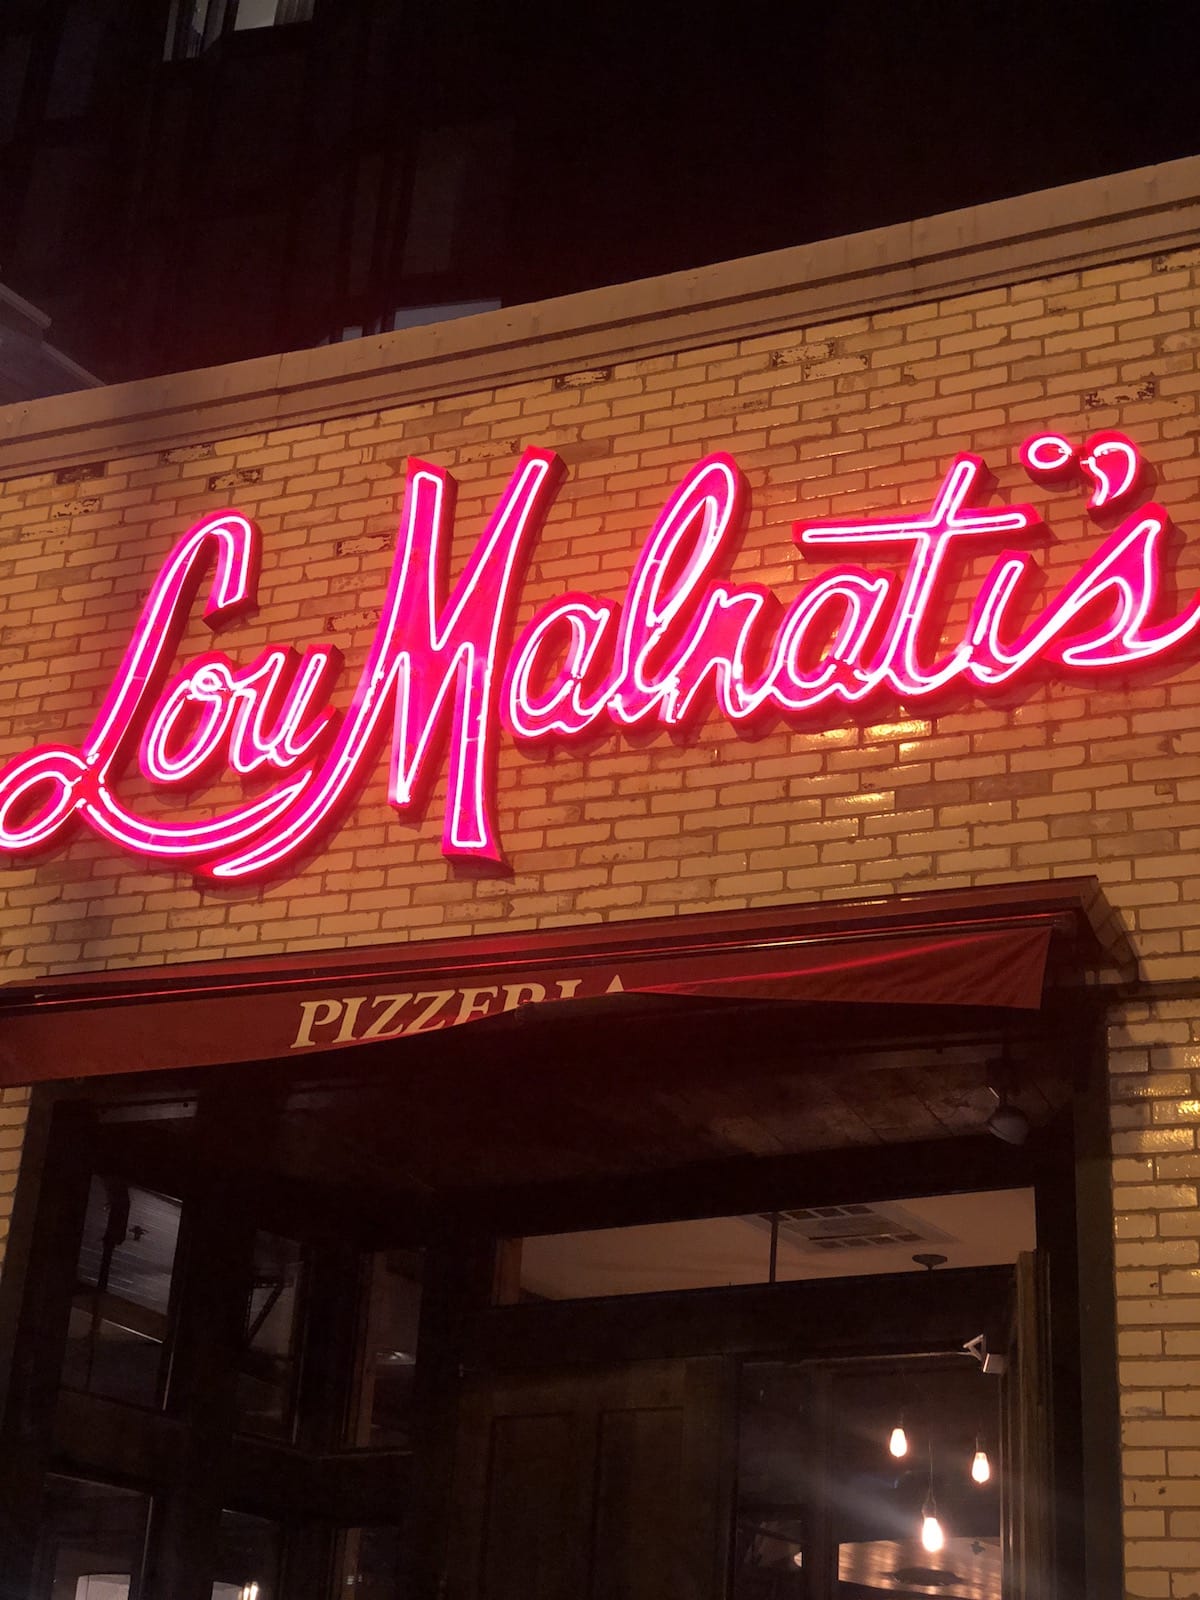 Enjoy Illinois: Exploring Chicago and the Magnificent Mile - Lou Malnat's Pizza